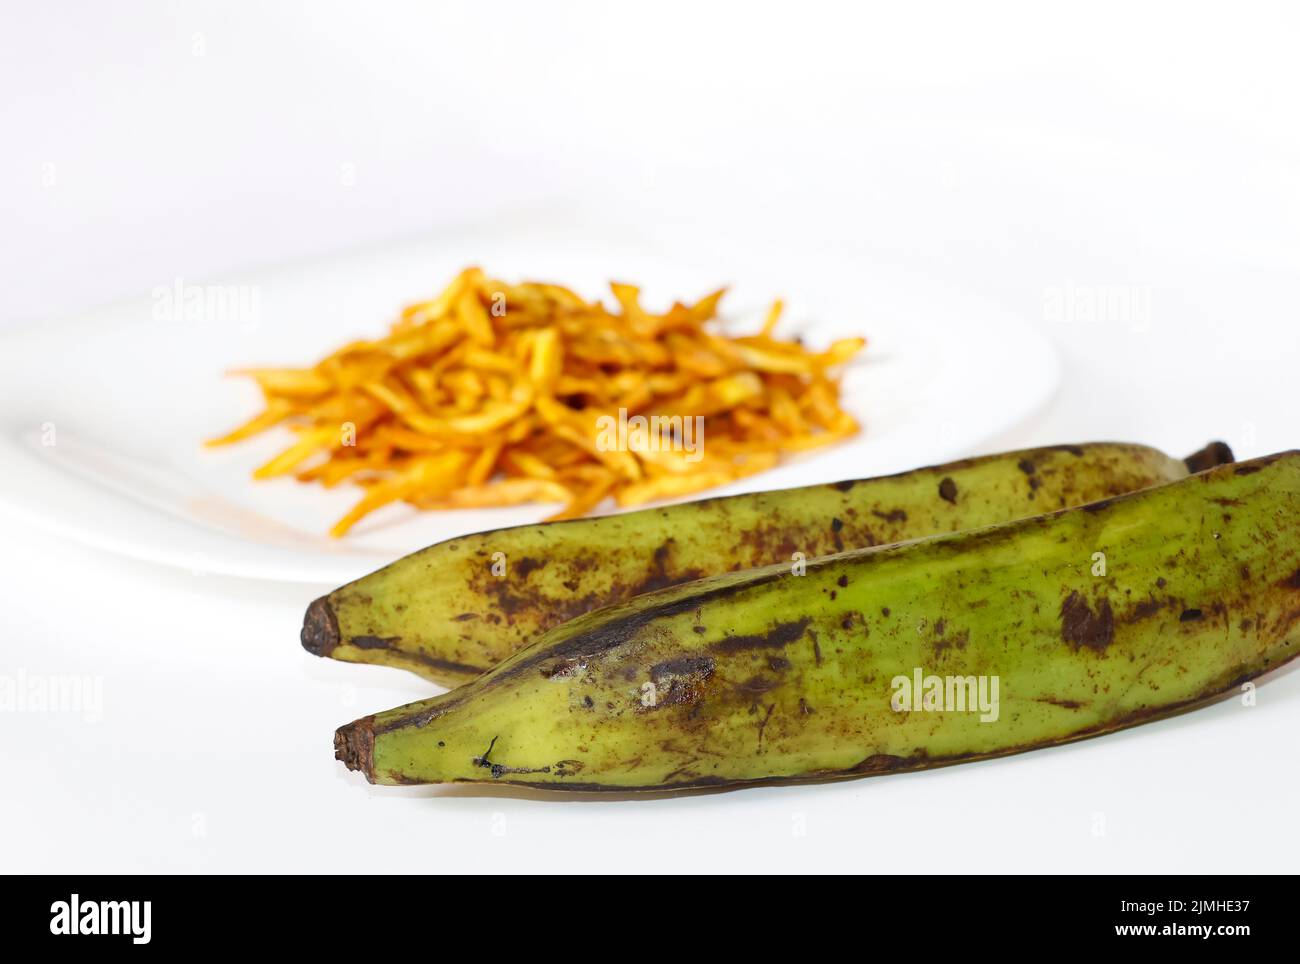 Closeup Image Of Plantain Banana And Chips In White Background Stock Photo